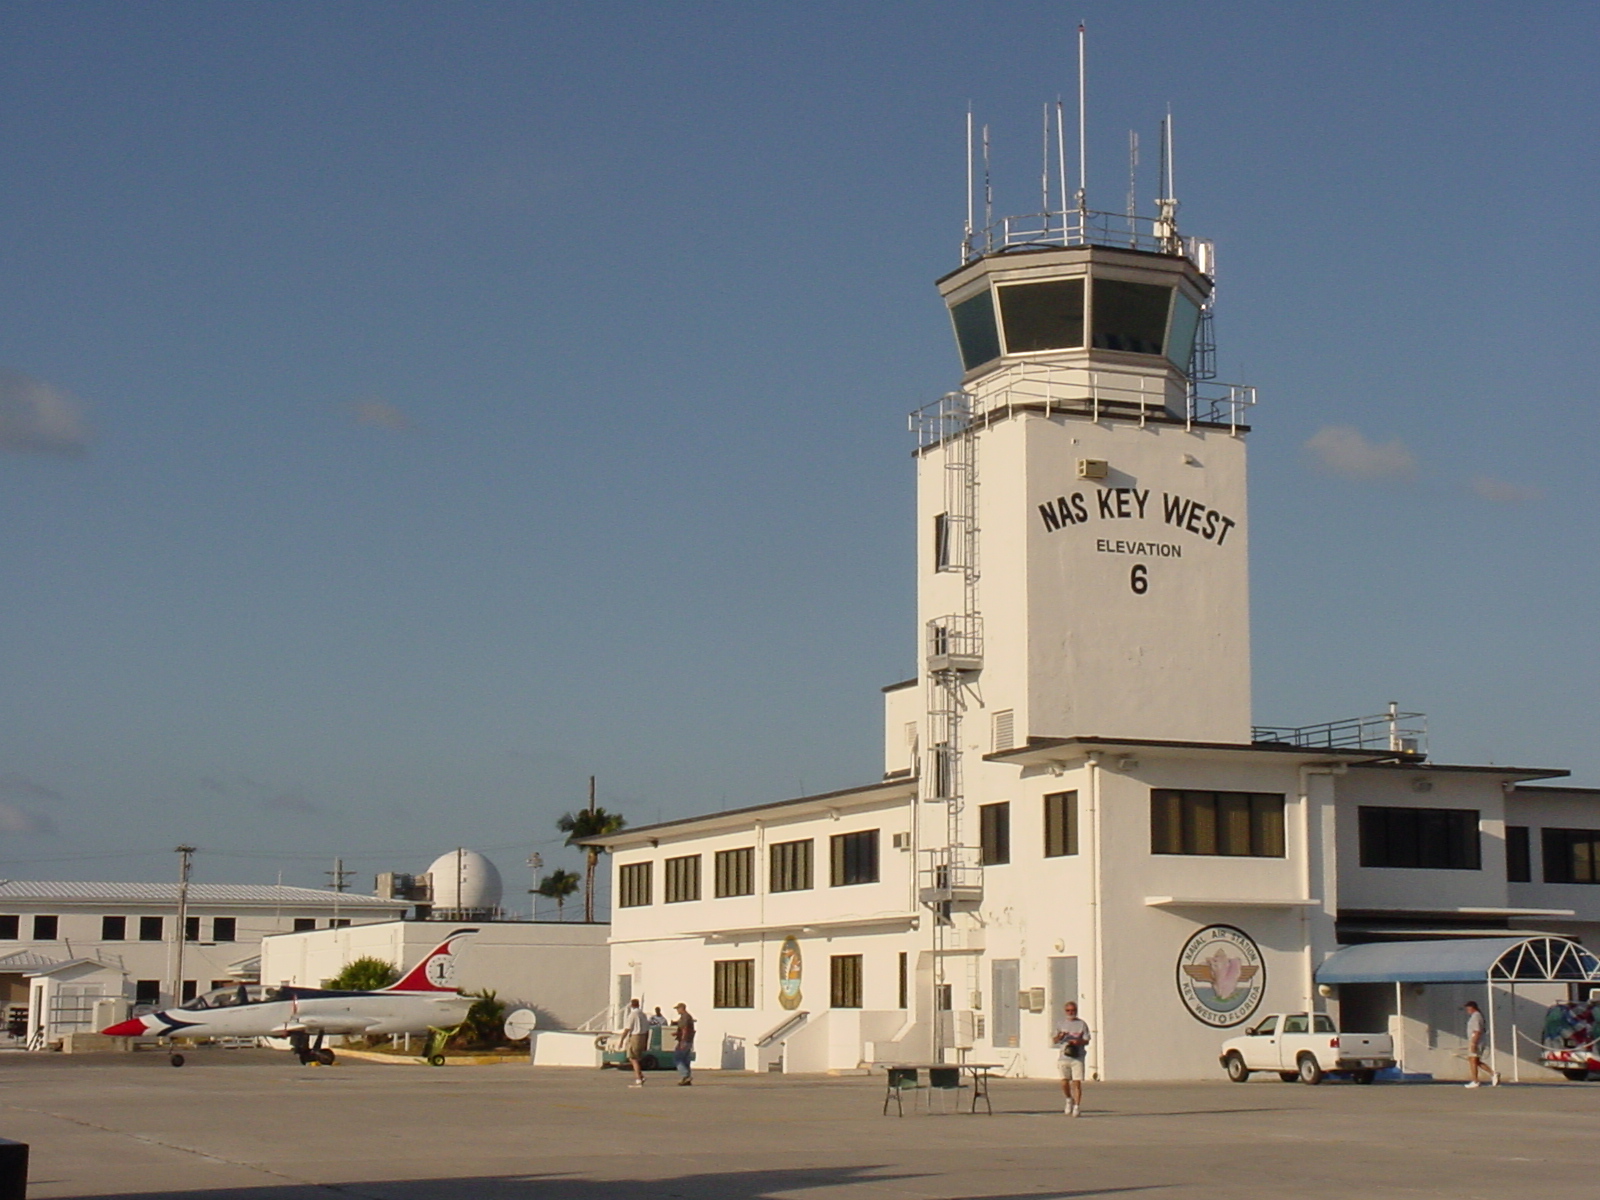 Key West Naval Air Station Homes For Sale and Rent